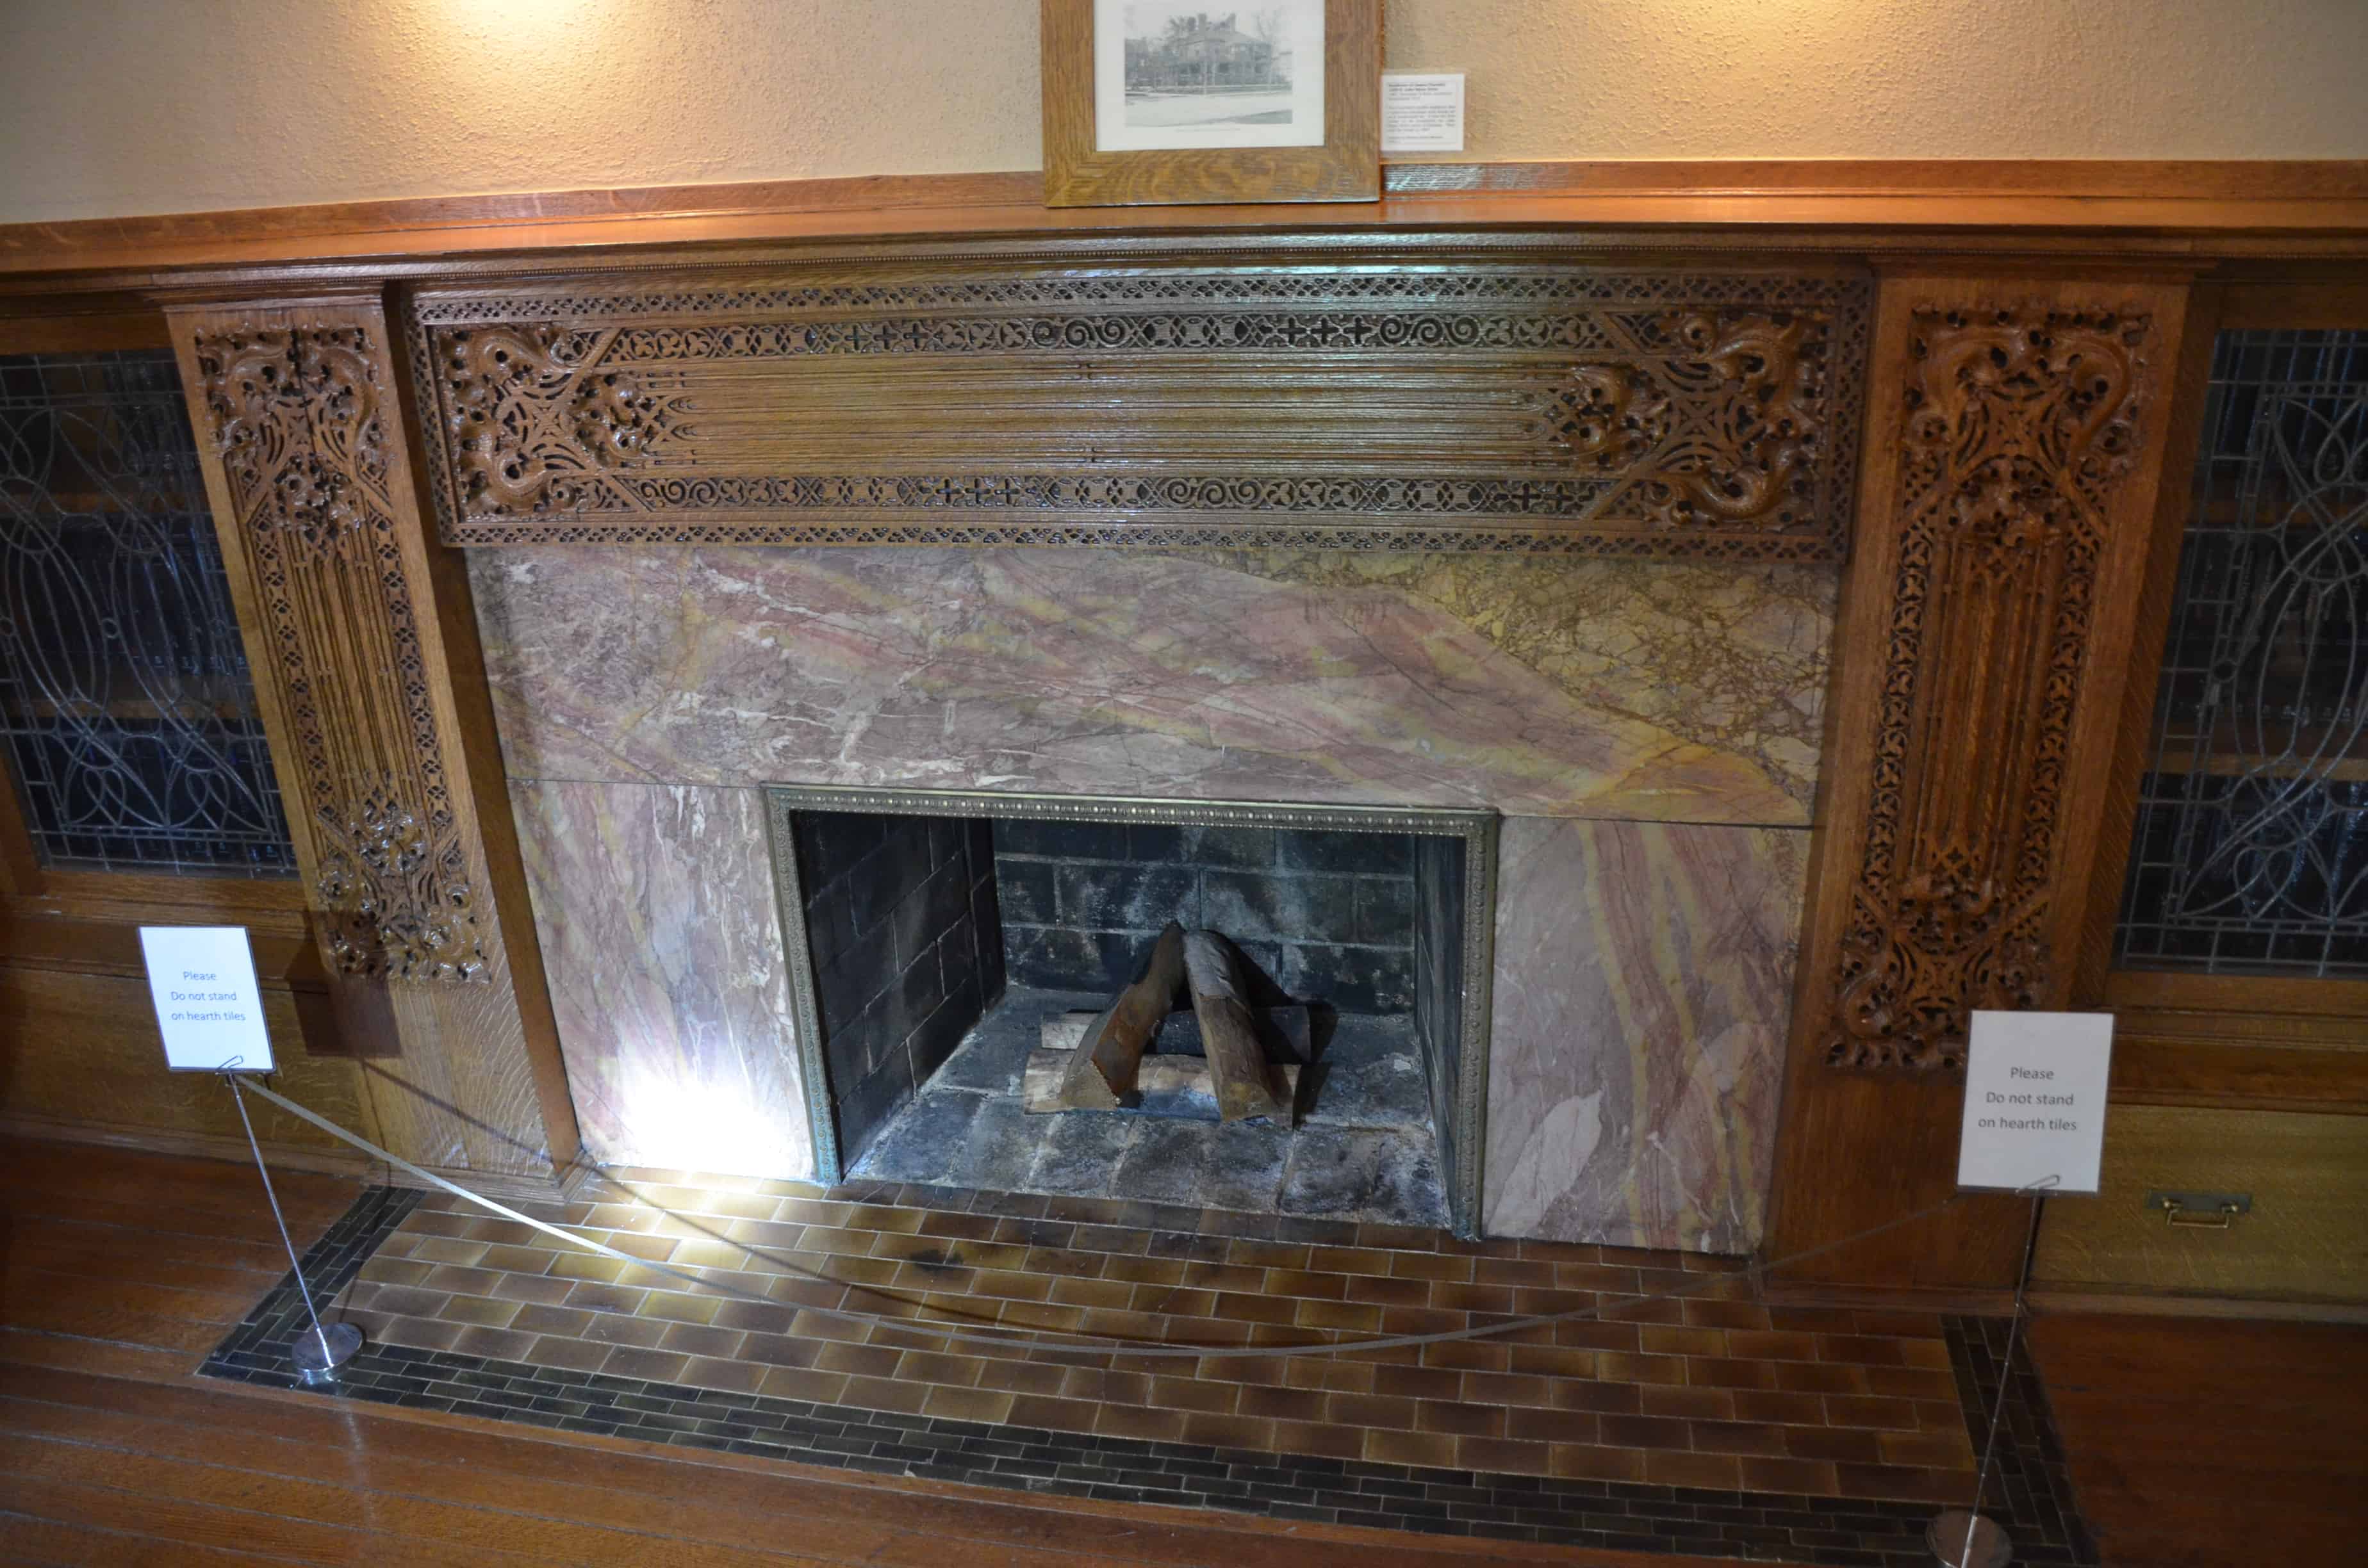 Living room fireplace of the Charnley-Persky House in Chicago, Illinois